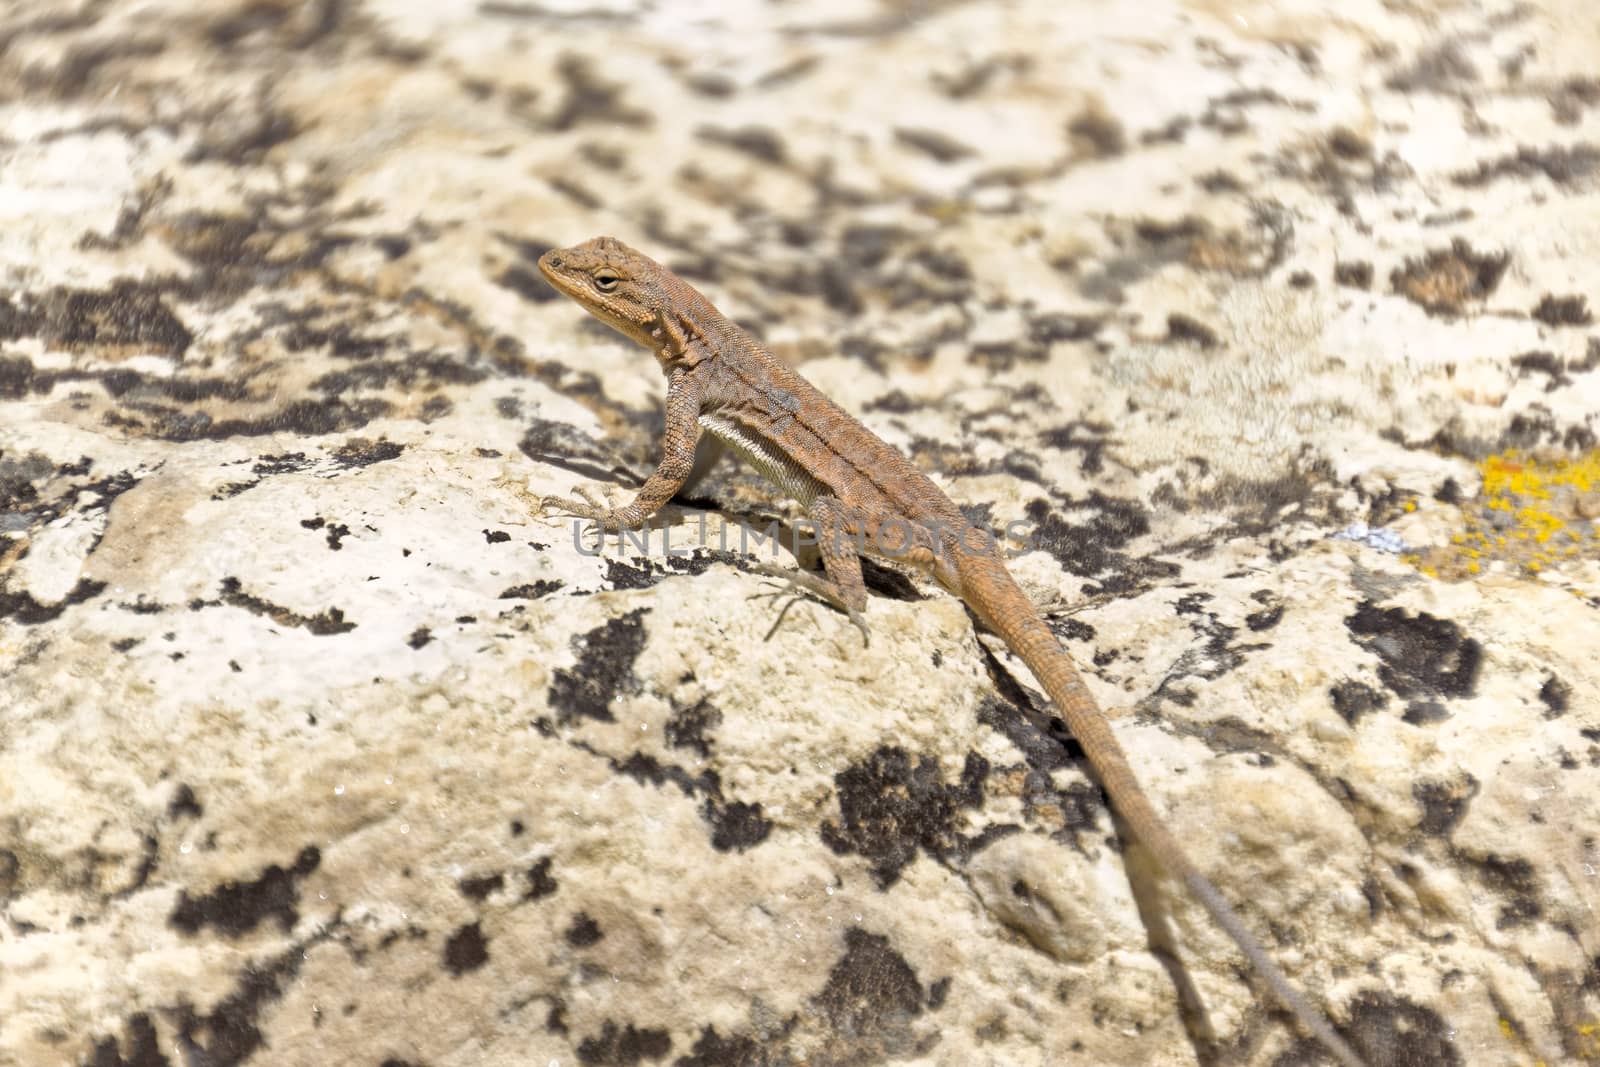 A small lizard in Cape Royal, Grand Canyon.